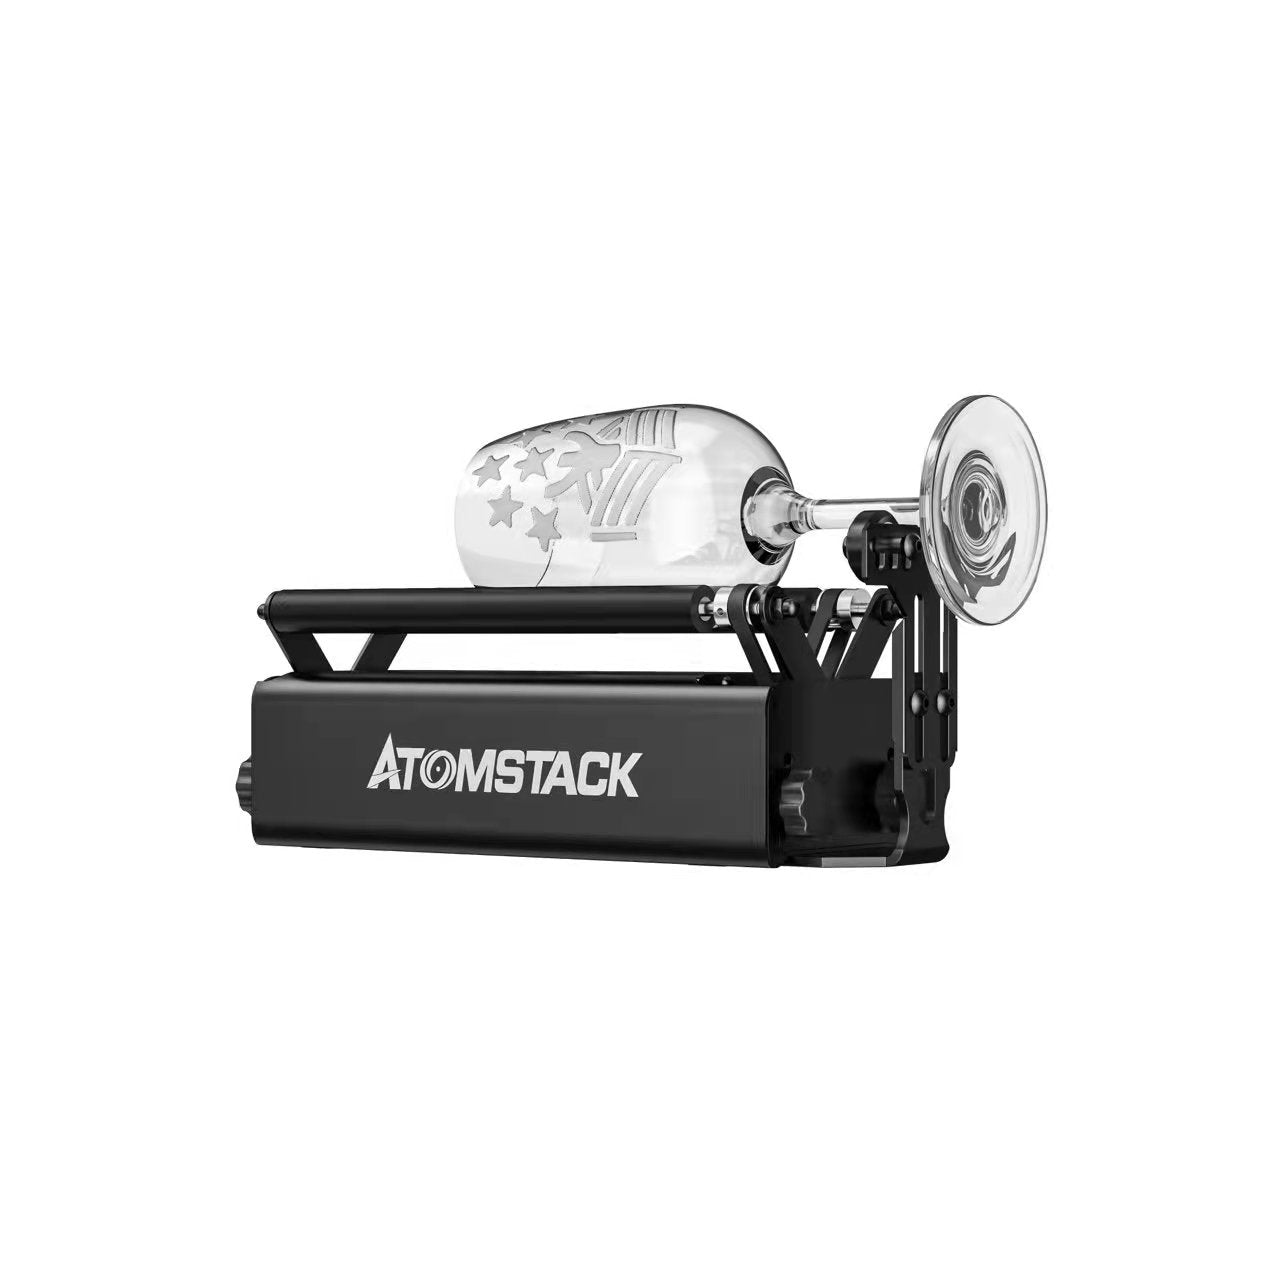 Atomstack R1 Pro Laser Rotary Roller, 4 in 1 Multi-function Chuck Rotary with Risers, 180° Adjustable Chuck with 3 Jaws for Engraving Rings, Spherical